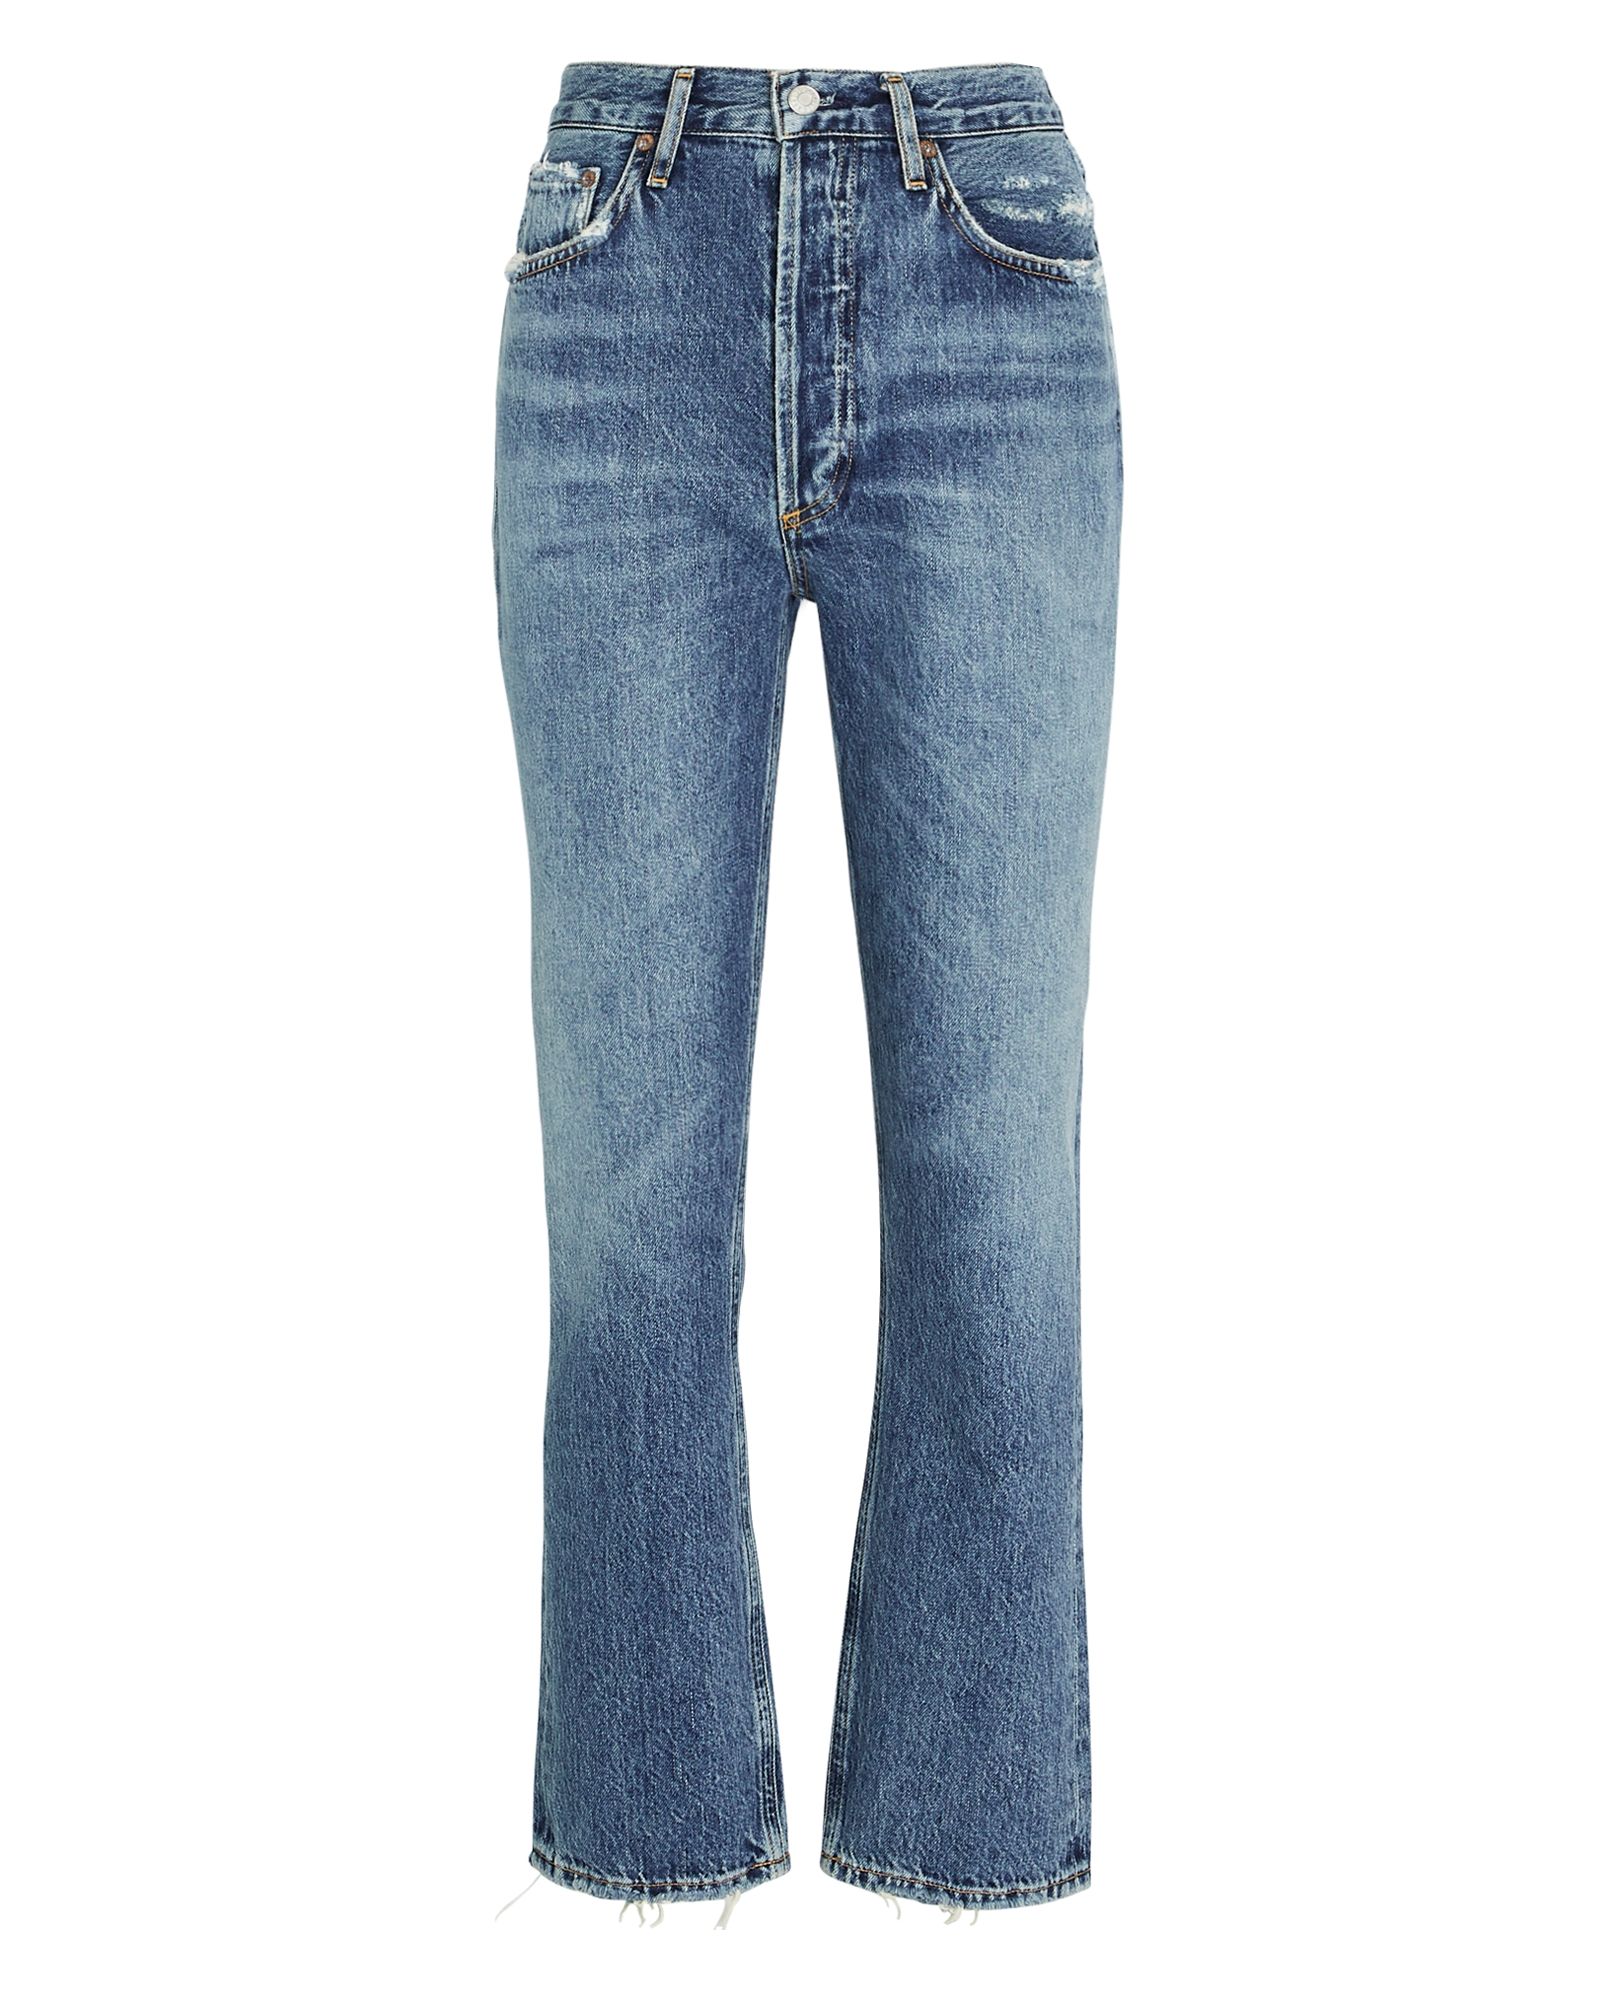 AGOLDE Riley High-Rise Straight Cropped Jeans, Denim 31 | INTERMIX